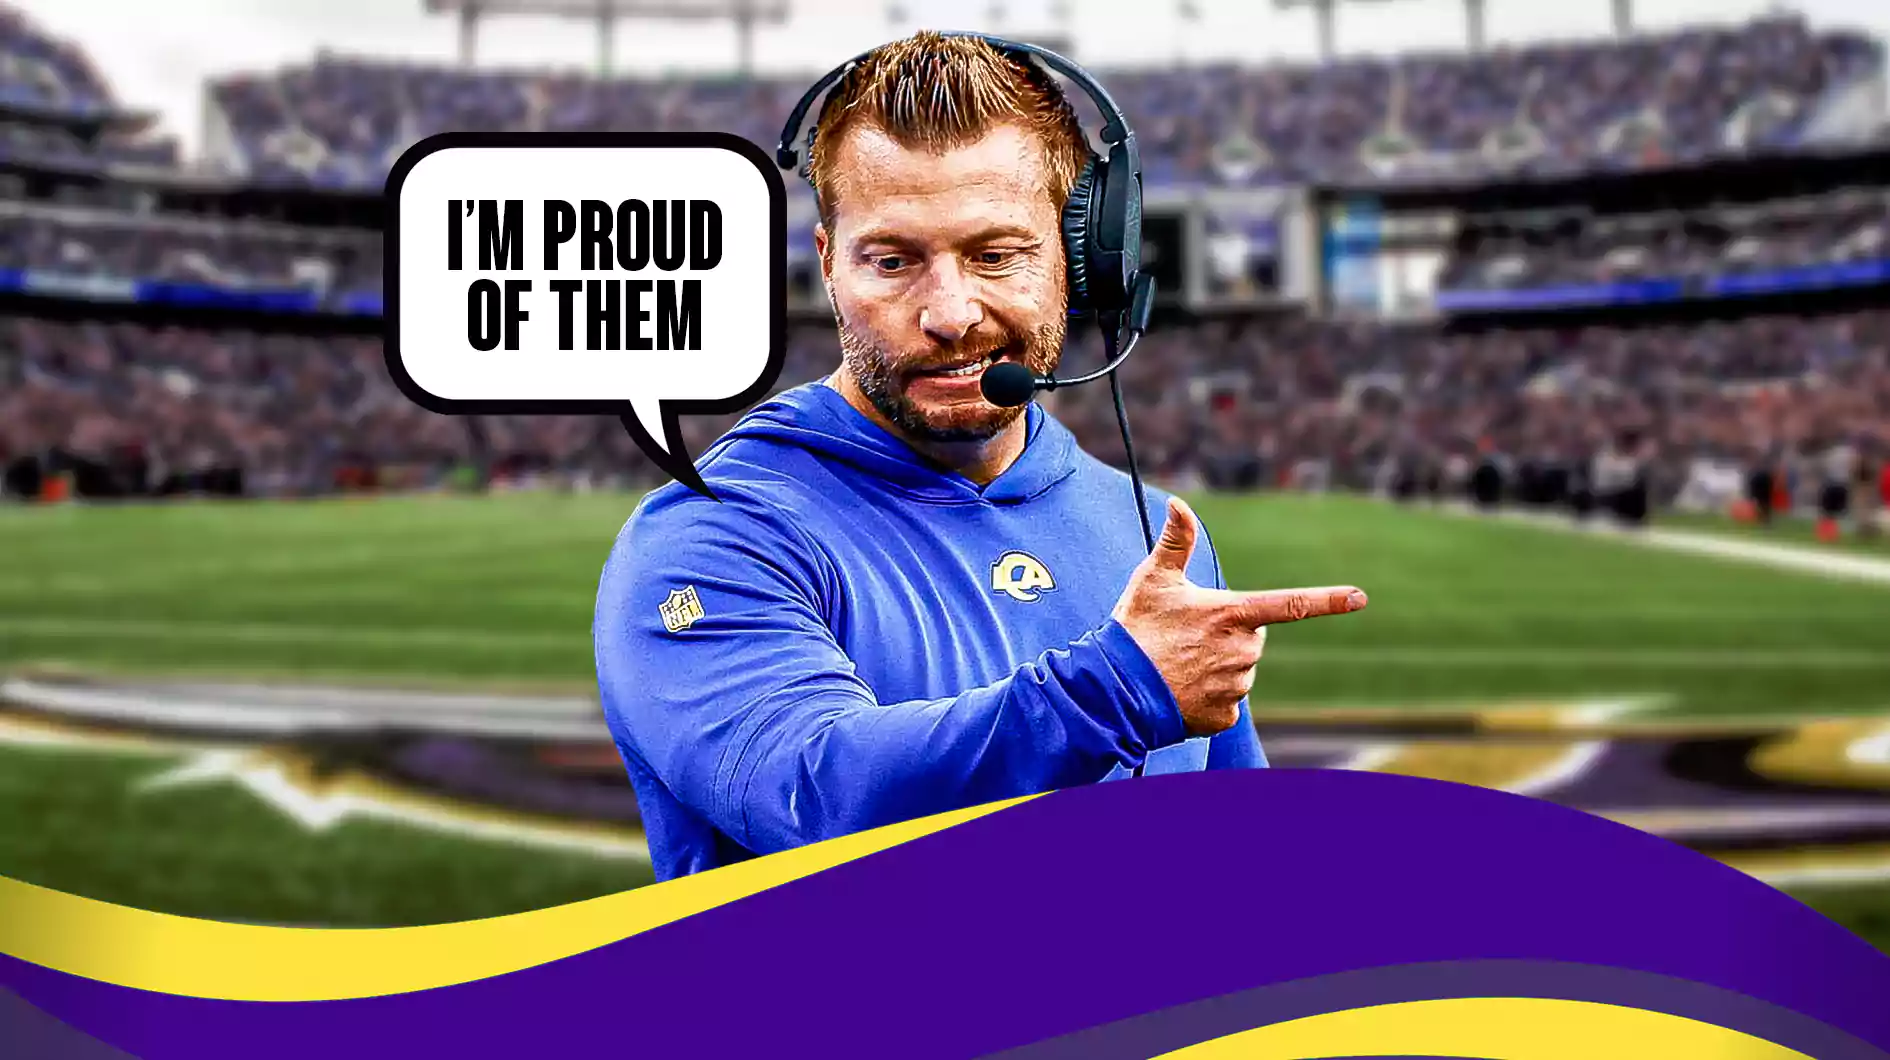 Sean McVay saying “I’m proud of them” with the Ravens stadium in background